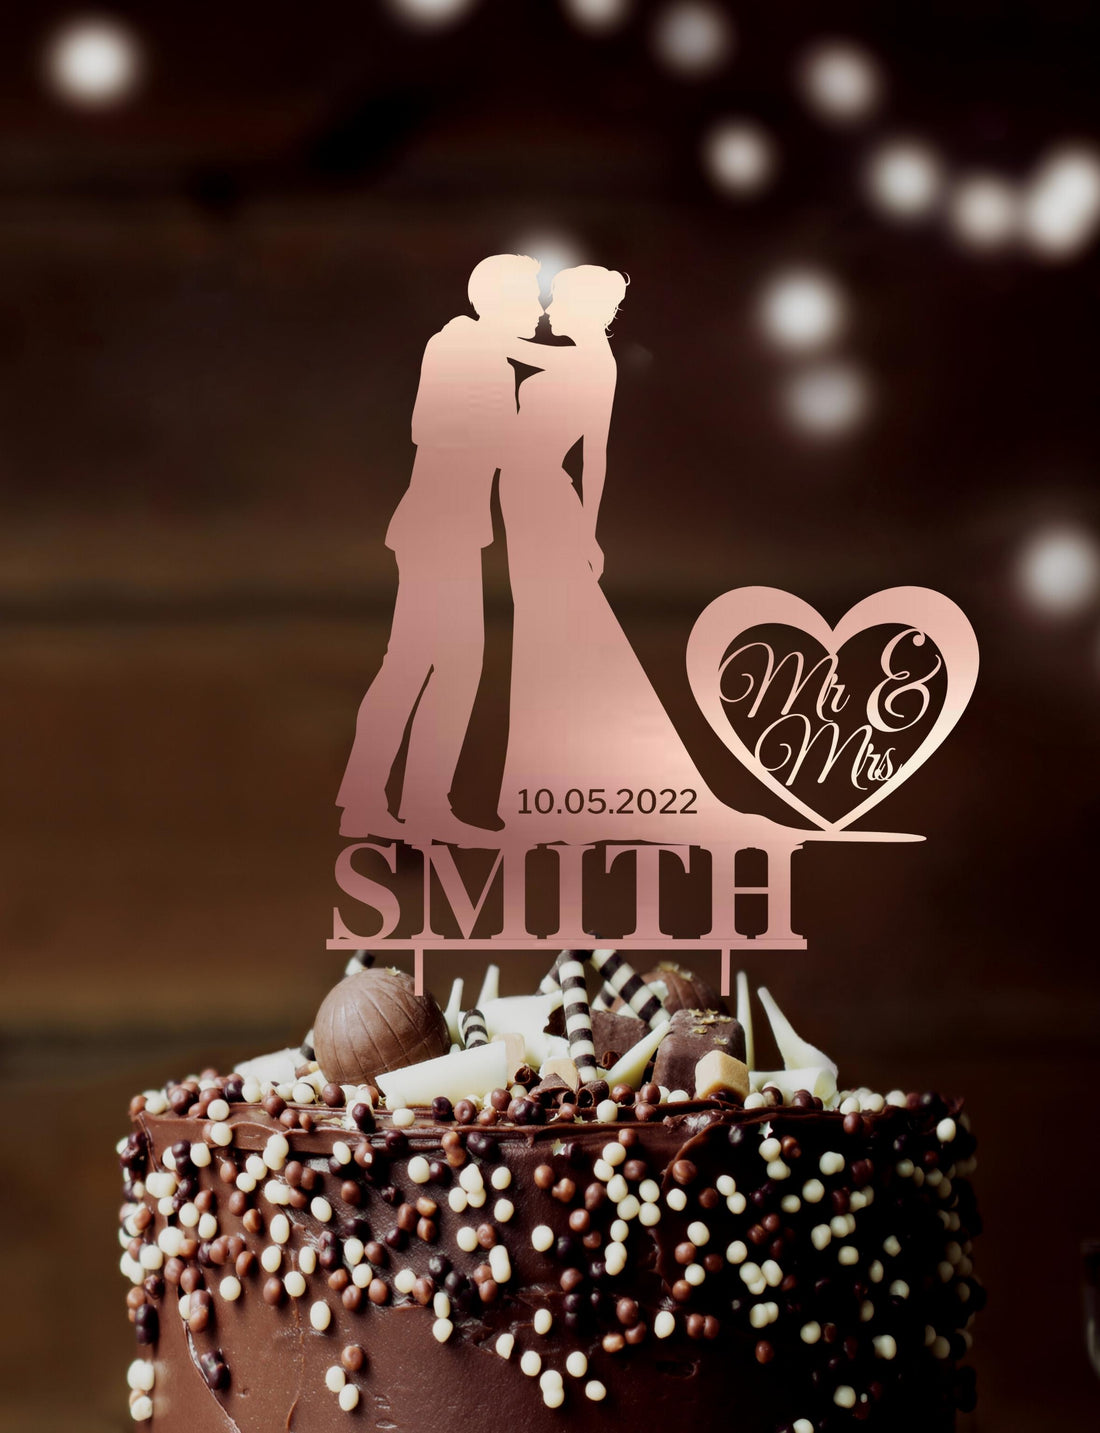 Bride Groom Image Date with Names Cake Topper – Quick Creations